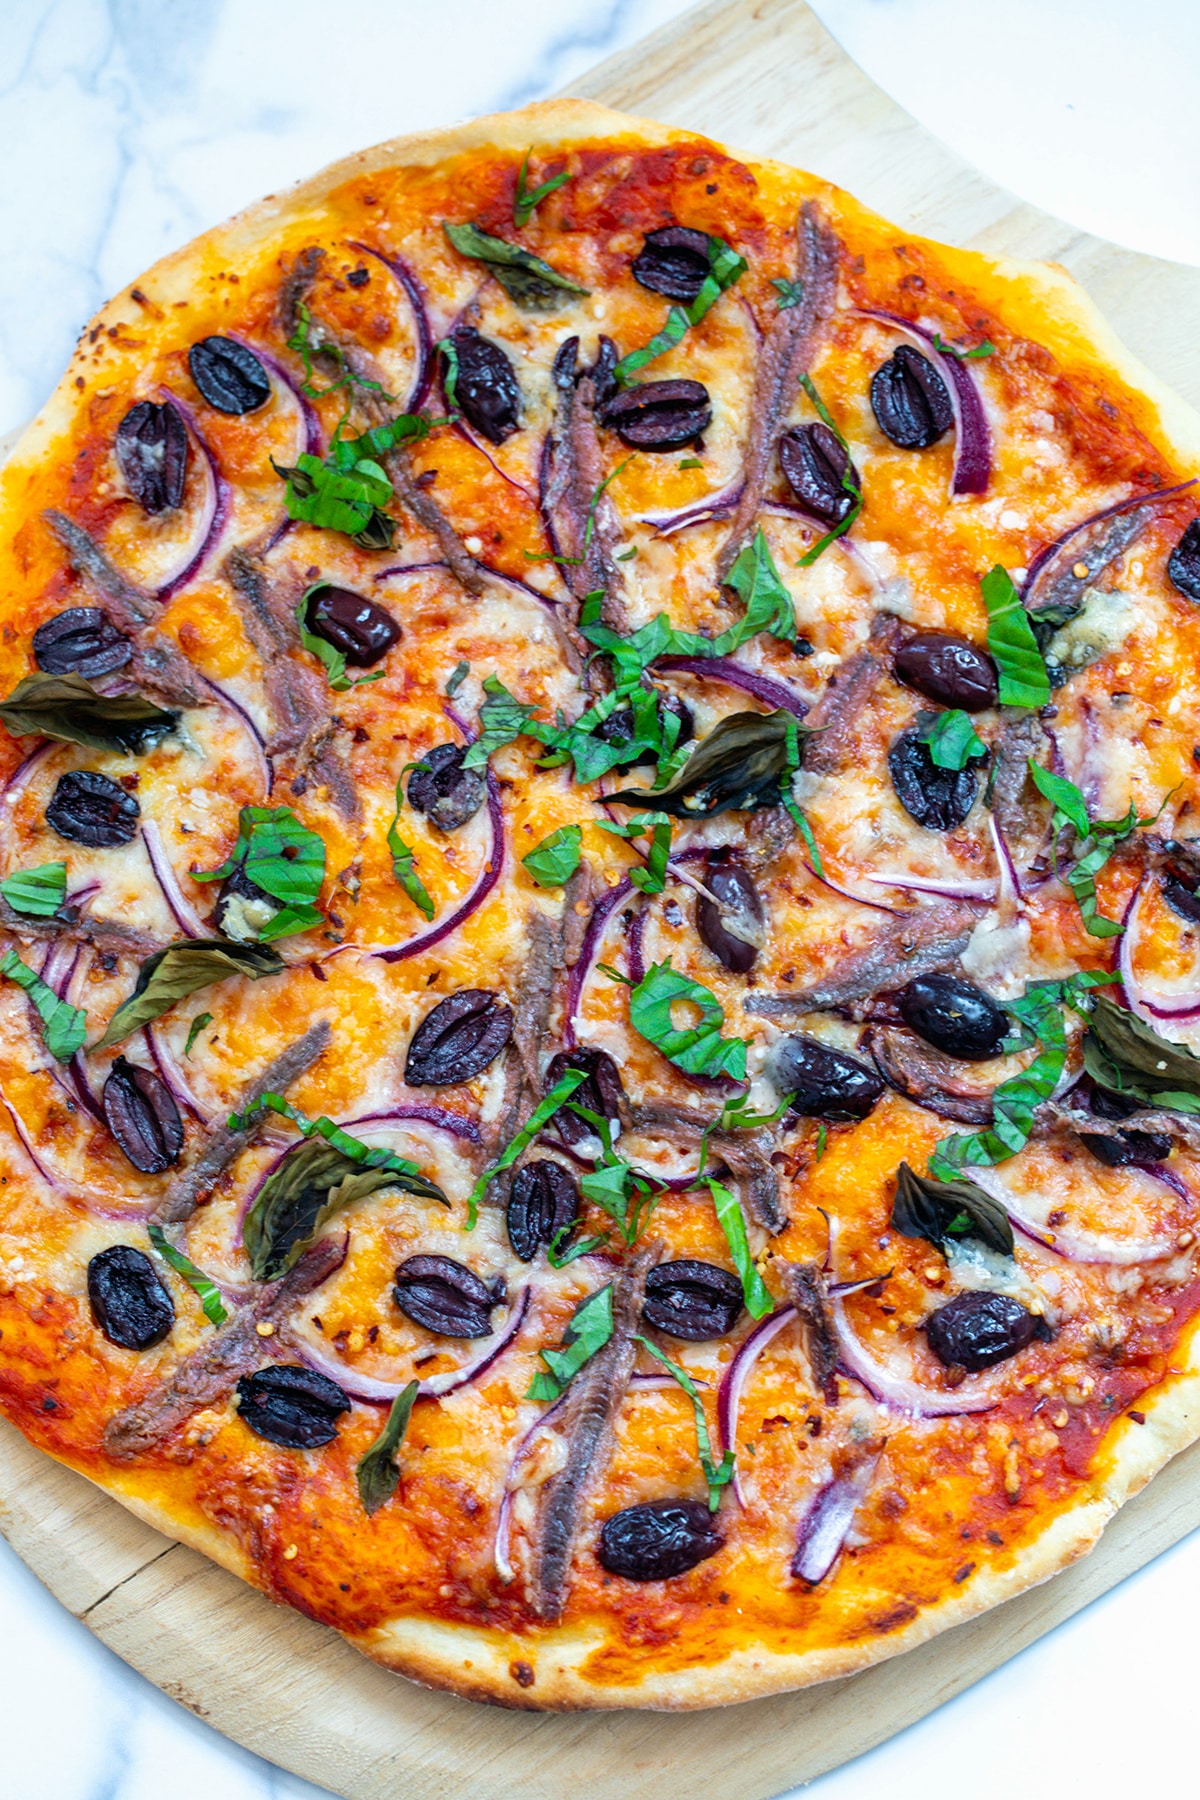 Full anchovy pizza just out of the oven.